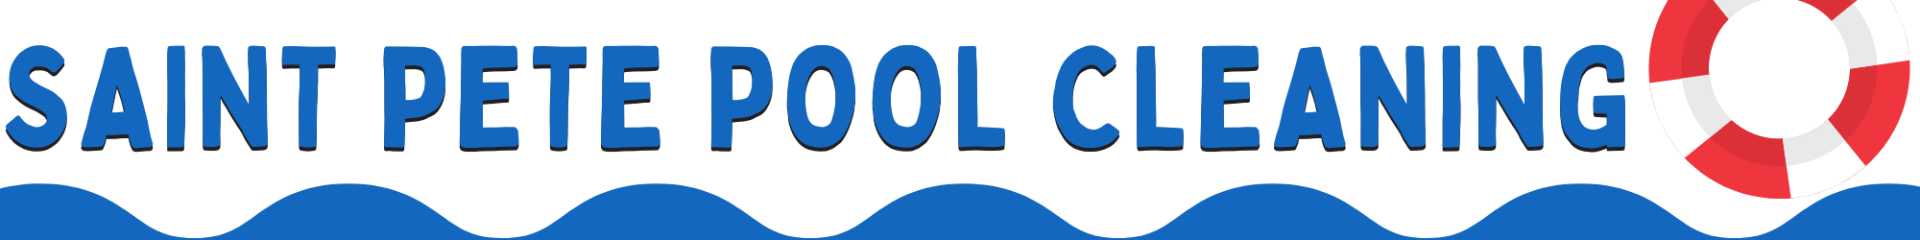 st-pete-pool-cleaner-company-logo